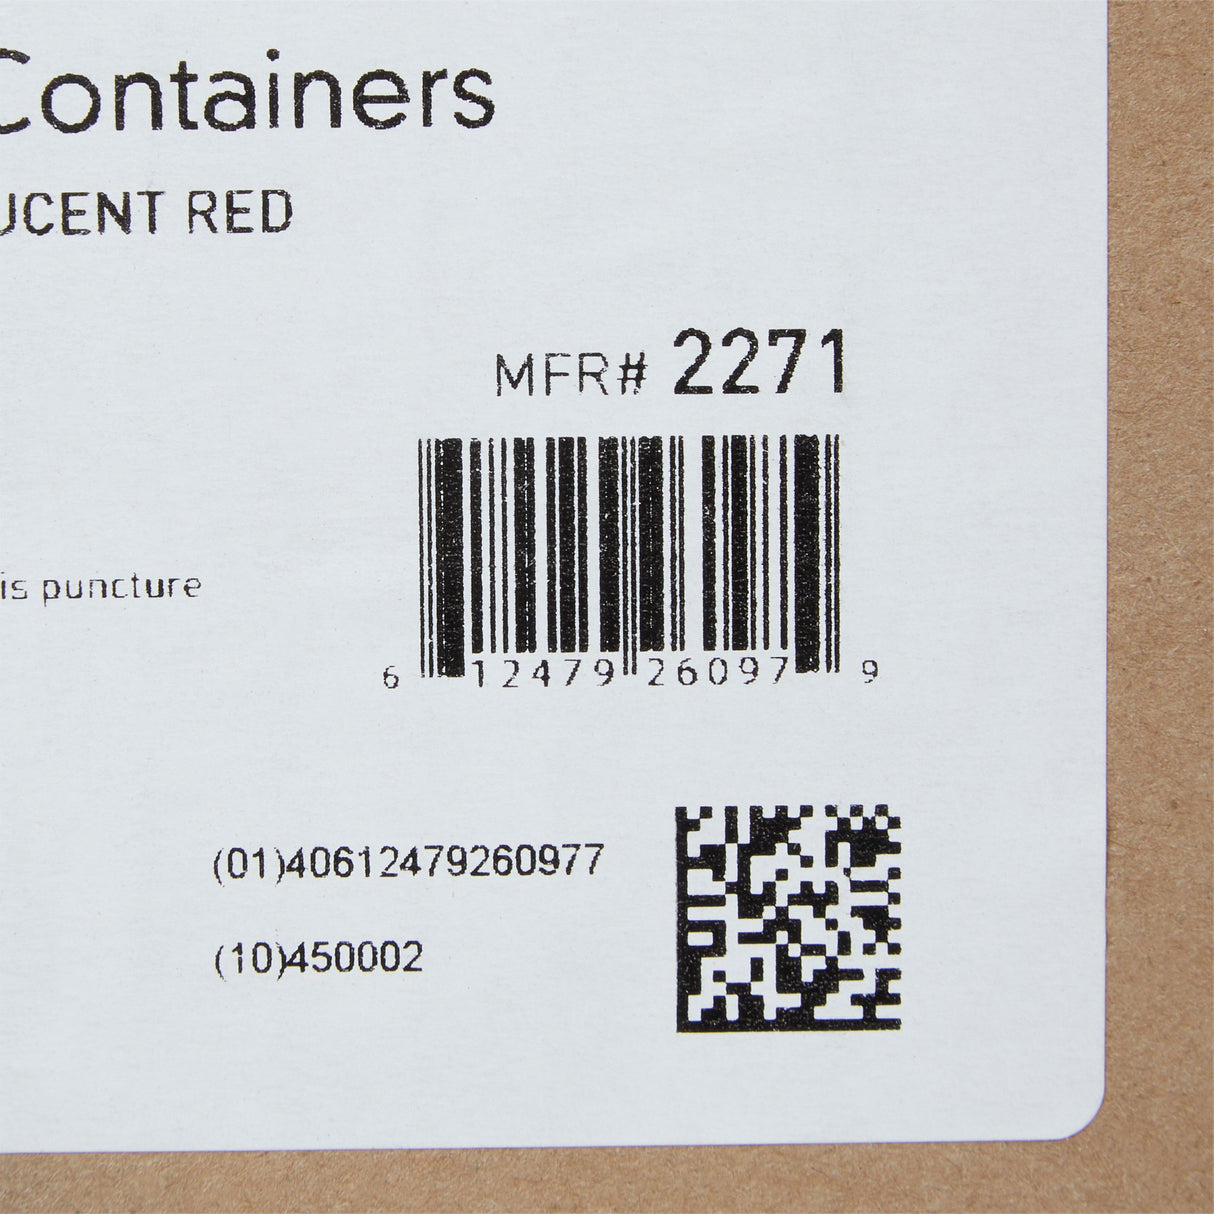 CONTAINER, SHARPS RED 2GL (20/CS)